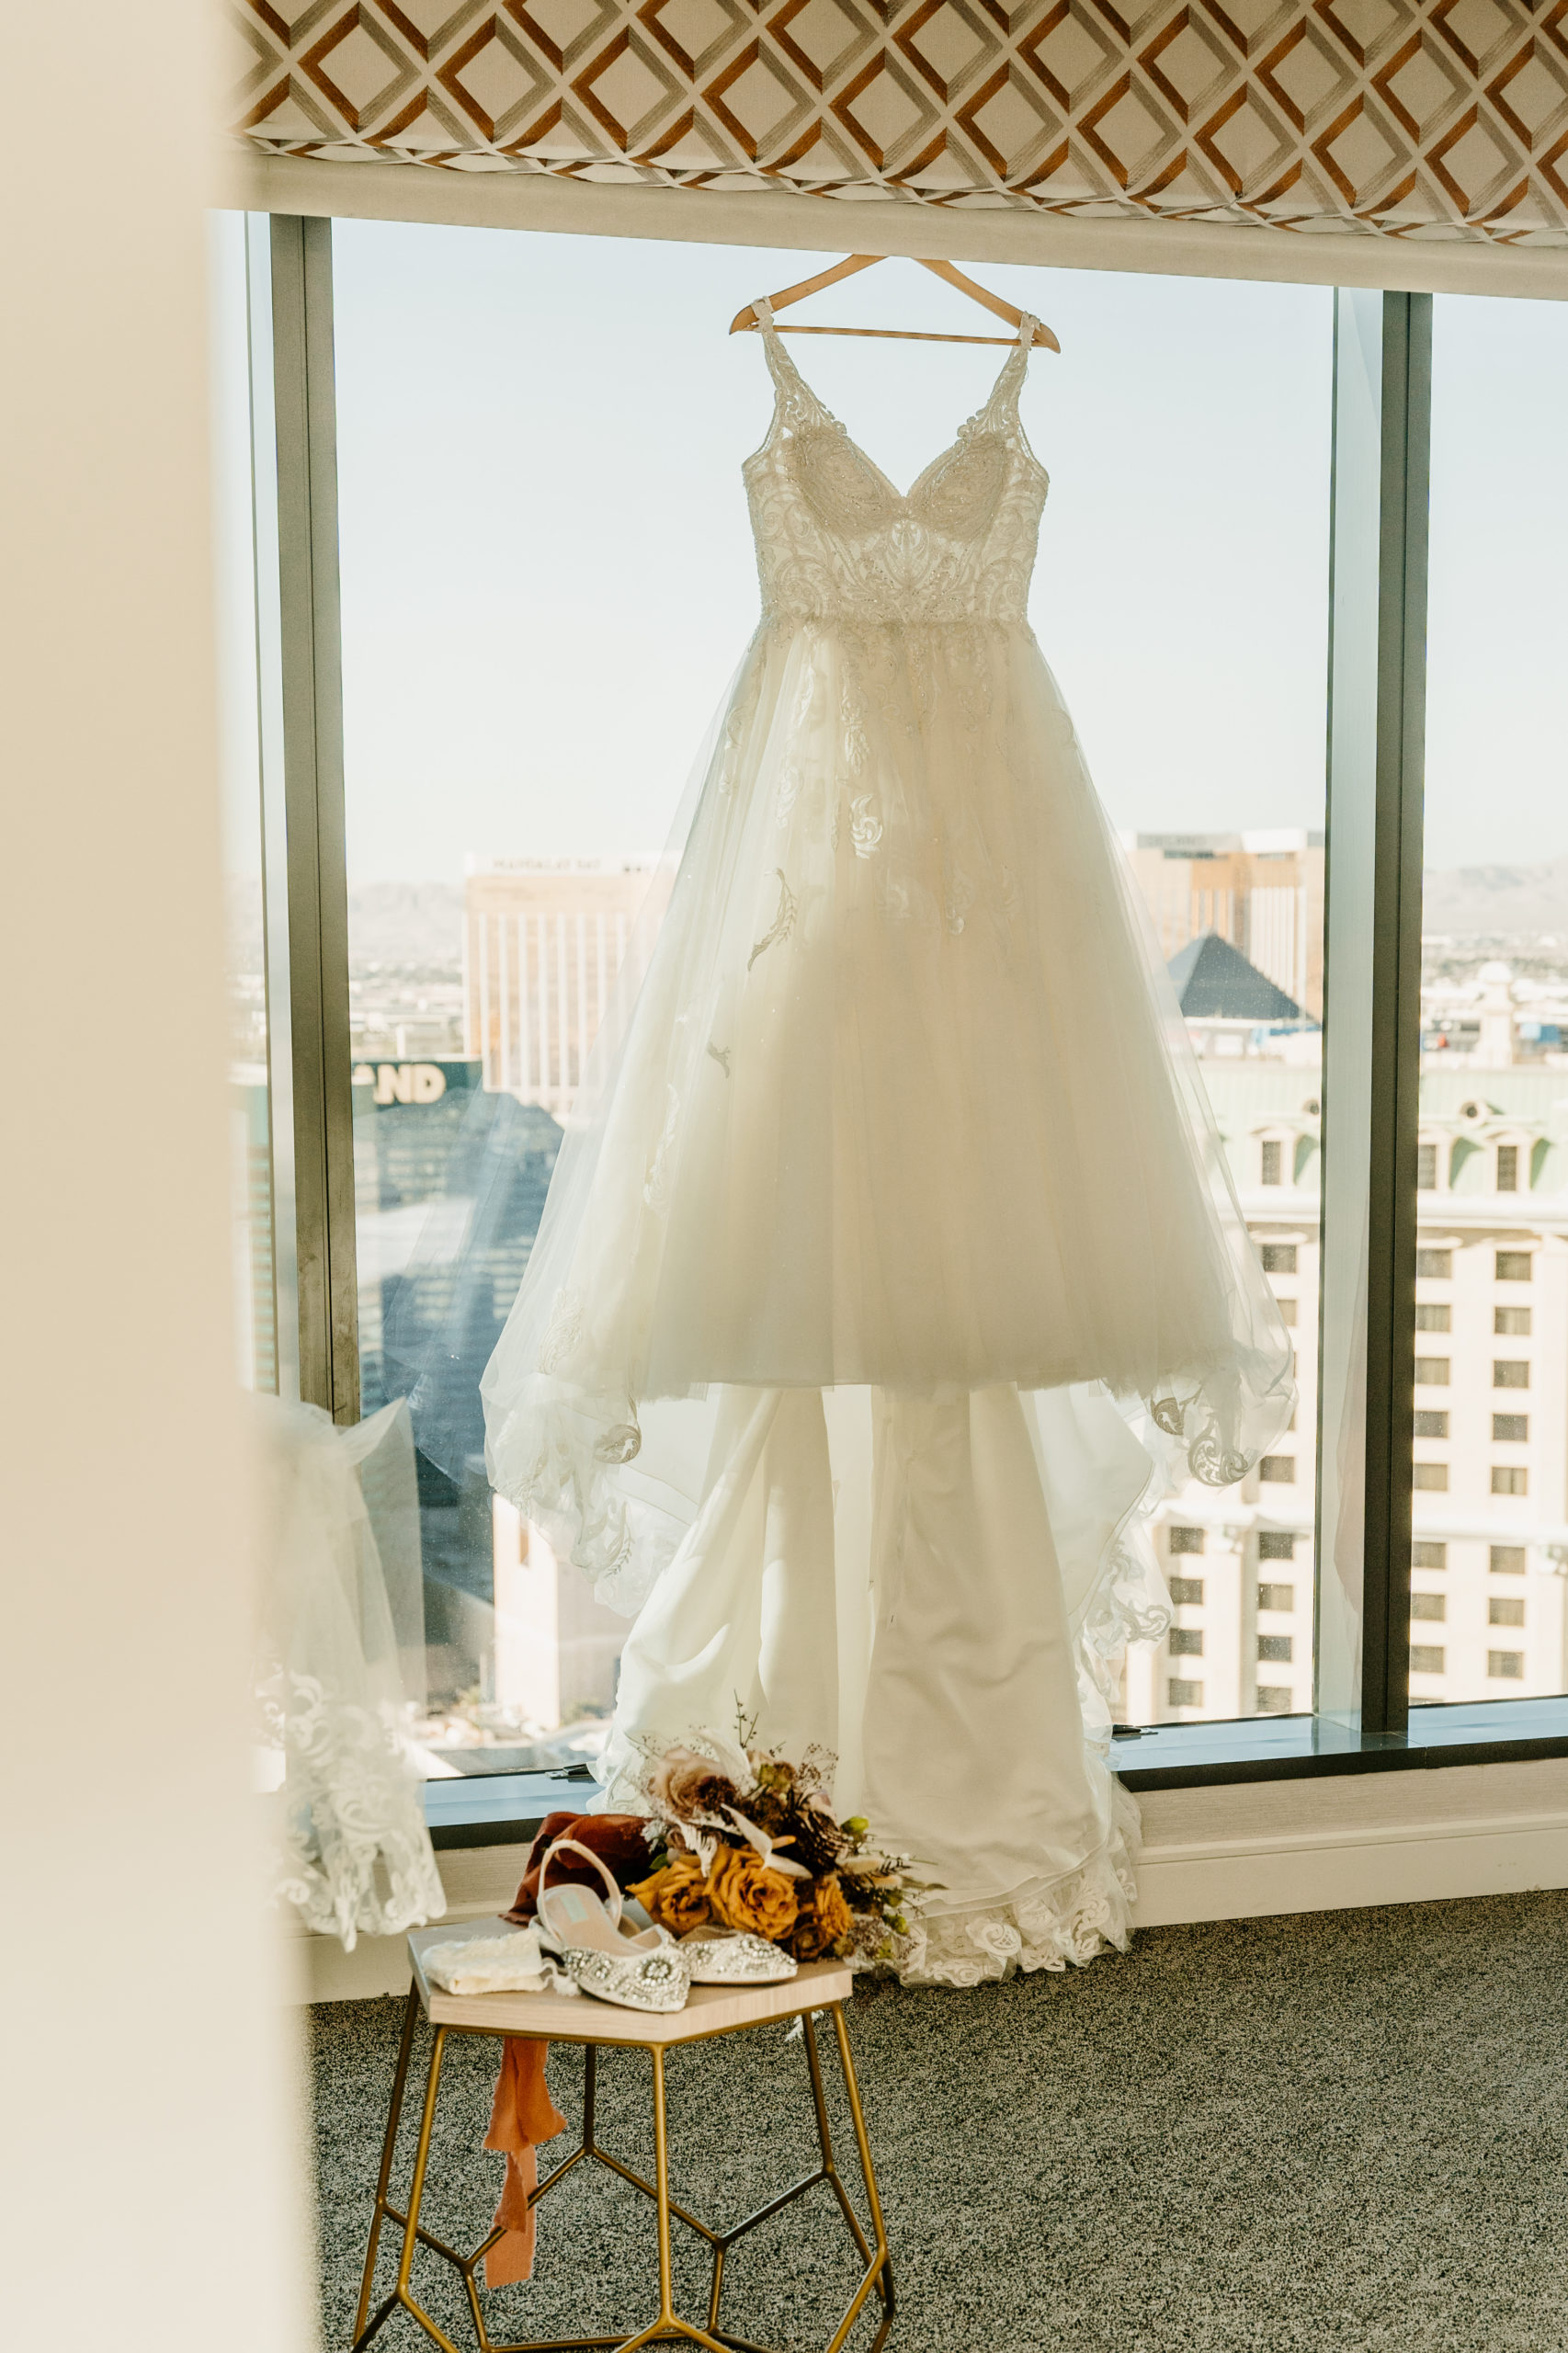 Brides dress hanging in front of window